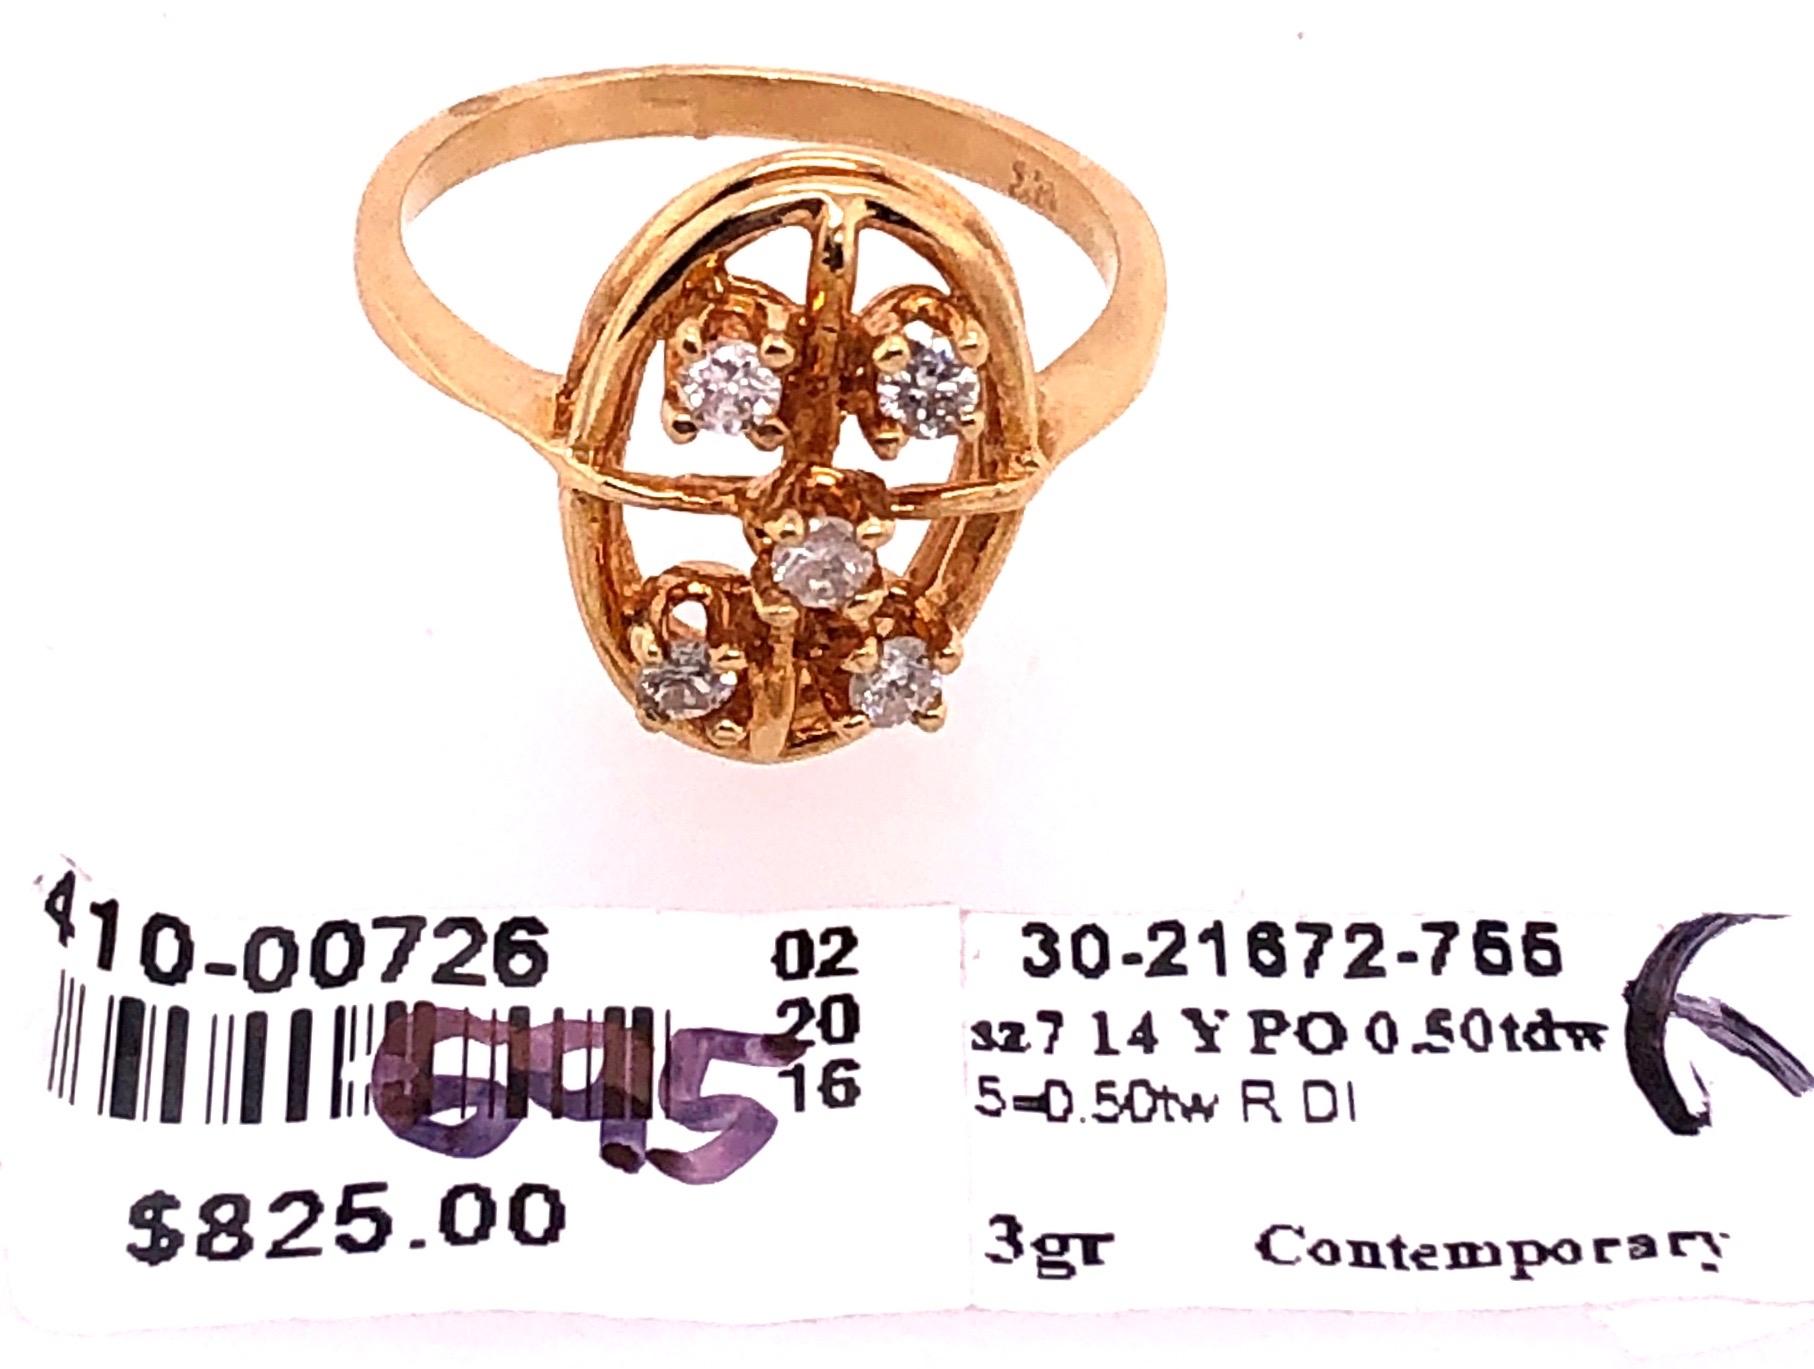 14 Karat Yellow Gold Contemporary Ring with Diamonds 0.50 TDW For Sale 2